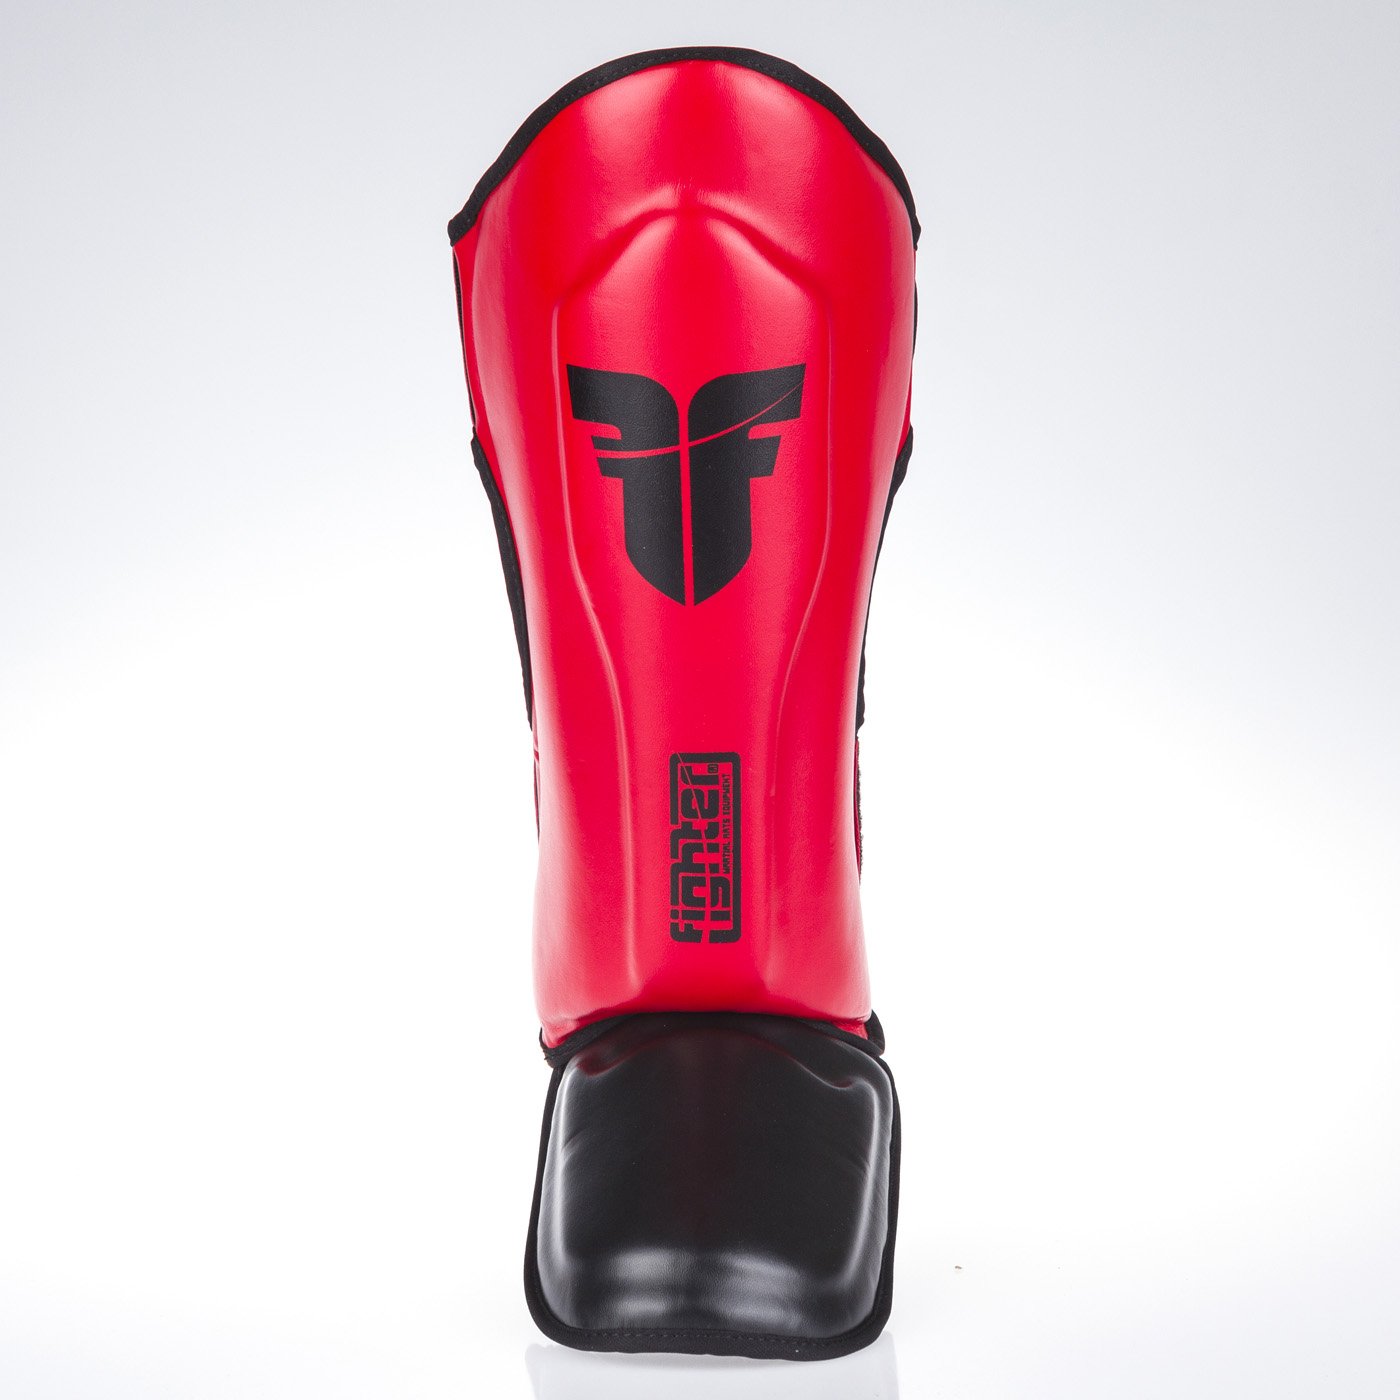 Fighter Shinguards Thai Classic - red/black